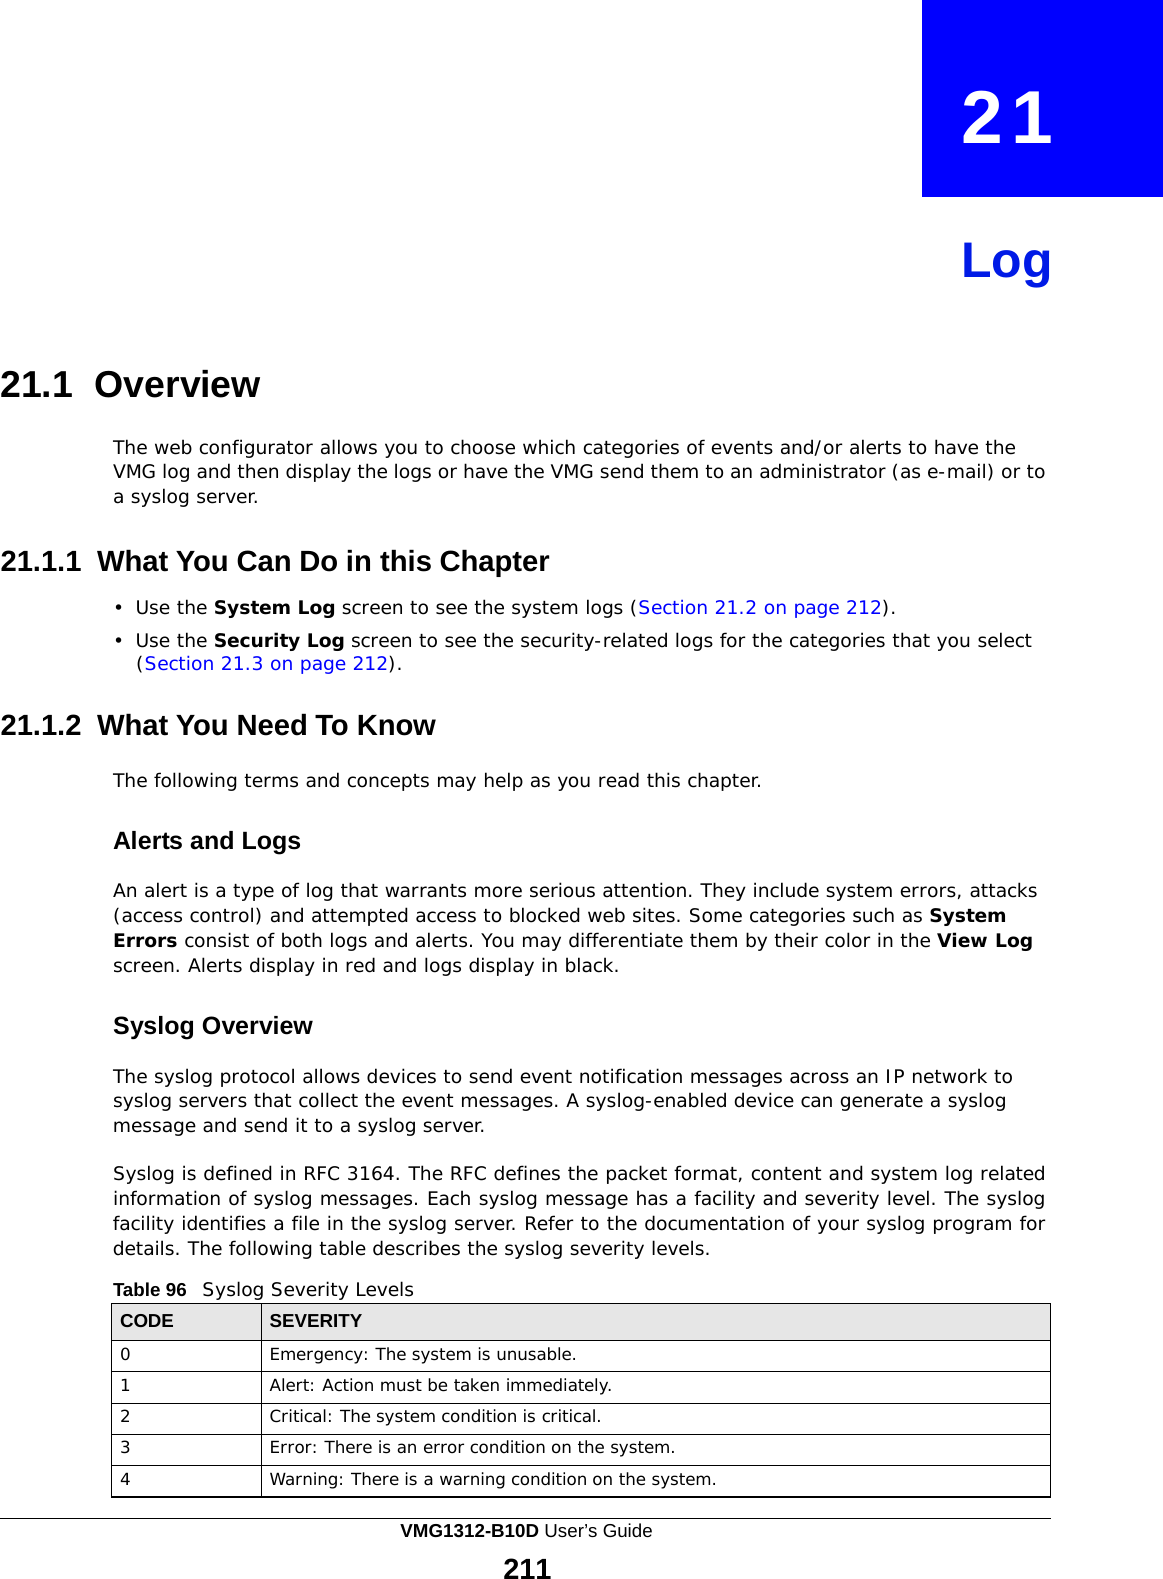  21     Log     21.1 Overview  The web configurator allows you to choose which categories of events and/or alerts to have the VMG log and then display the logs or have the VMG send them to an administrator (as e-mail) or to a syslog server.   21.1.1 What You Can Do in this Chapter  •  Use the System Log screen to see the system logs (Section 21.2 on page 212).  •  Use the Security Log screen to see the security-related logs for the categories that you select (Section 21.3 on page 212).   21.1.2 What You Need To Know  The following terms and concepts may help as you read this chapter.   Alerts and Logs  An alert is a type of log that warrants more serious attention. They include system errors, attacks (access control) and attempted access to blocked web sites. Some categories such as System Errors consist of both logs and alerts. You may differentiate them by their color in the View Log screen. Alerts display in red and logs display in black.   Syslog Overview  The syslog protocol allows devices to send event notification messages across an IP network to syslog servers that collect the event messages. A syslog-enabled device can generate a syslog message and send it to a syslog server.  Syslog is defined in RFC 3164. The RFC defines the packet format, content and system log related information of syslog messages. Each syslog message has a facility and severity level. The syslog facility identifies a file in the syslog server. Refer to the documentation of your syslog program for details. The following table describes the syslog severity levels.  Table 96   Syslog Severity Levels  CODE SEVERITY 0 Emergency: The system is unusable. 1 Alert: Action must be taken immediately. 2 Critical: The system condition is critical. 3 Error: There is an error condition on the system. 4 Warning: There is a warning condition on the system. VMG1312-B10D User’s Guide 211  